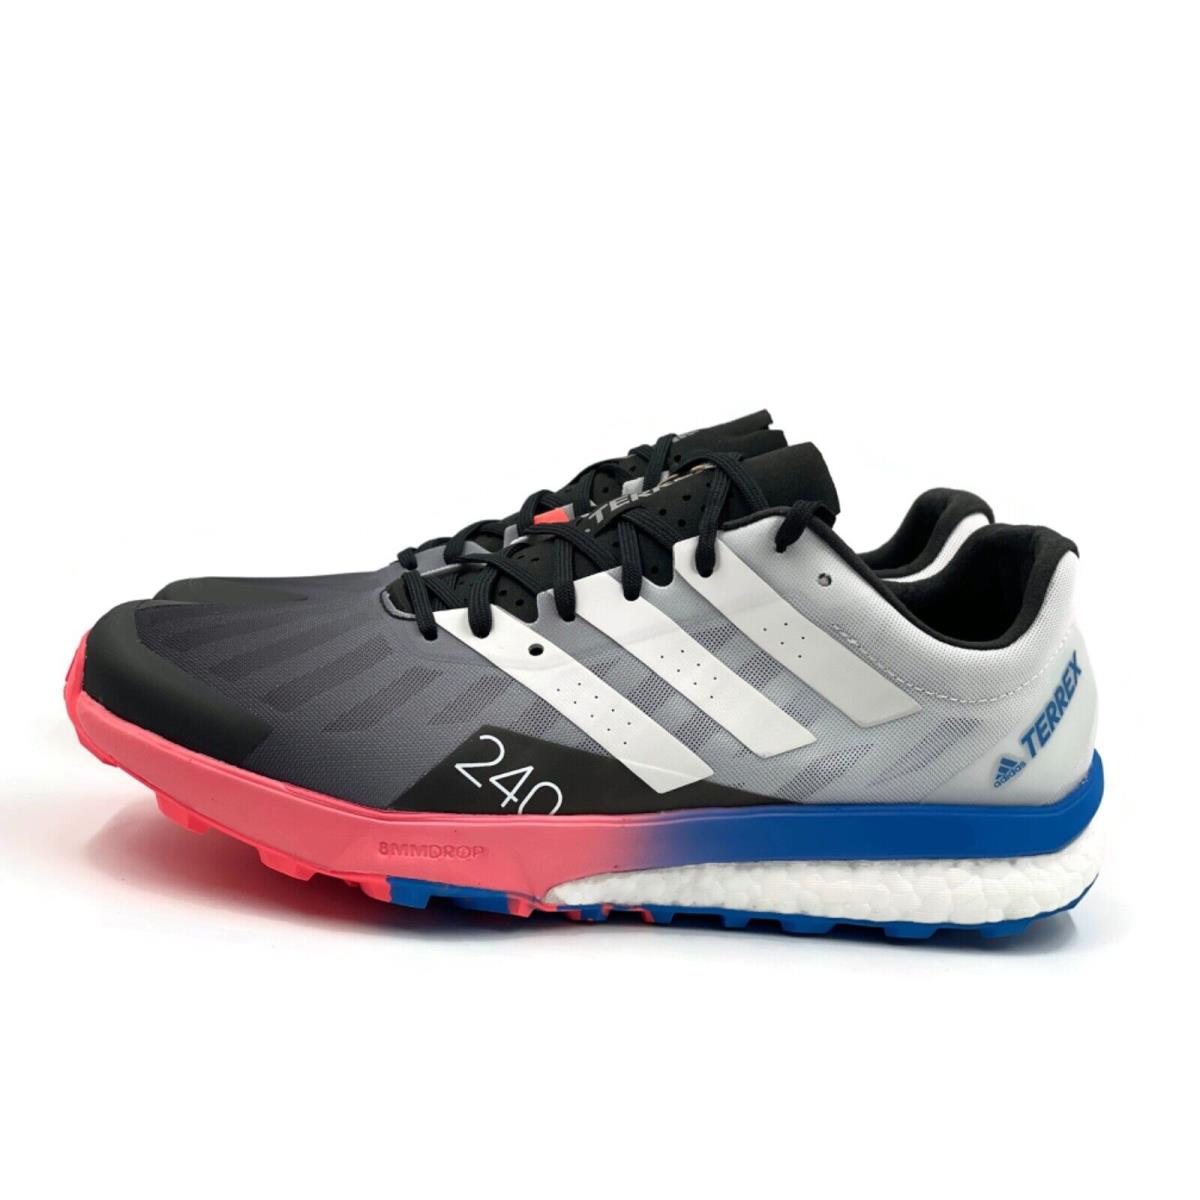 Adidas shoes TERREX Speed Ultra - Multicolor White Blue Red Black 4